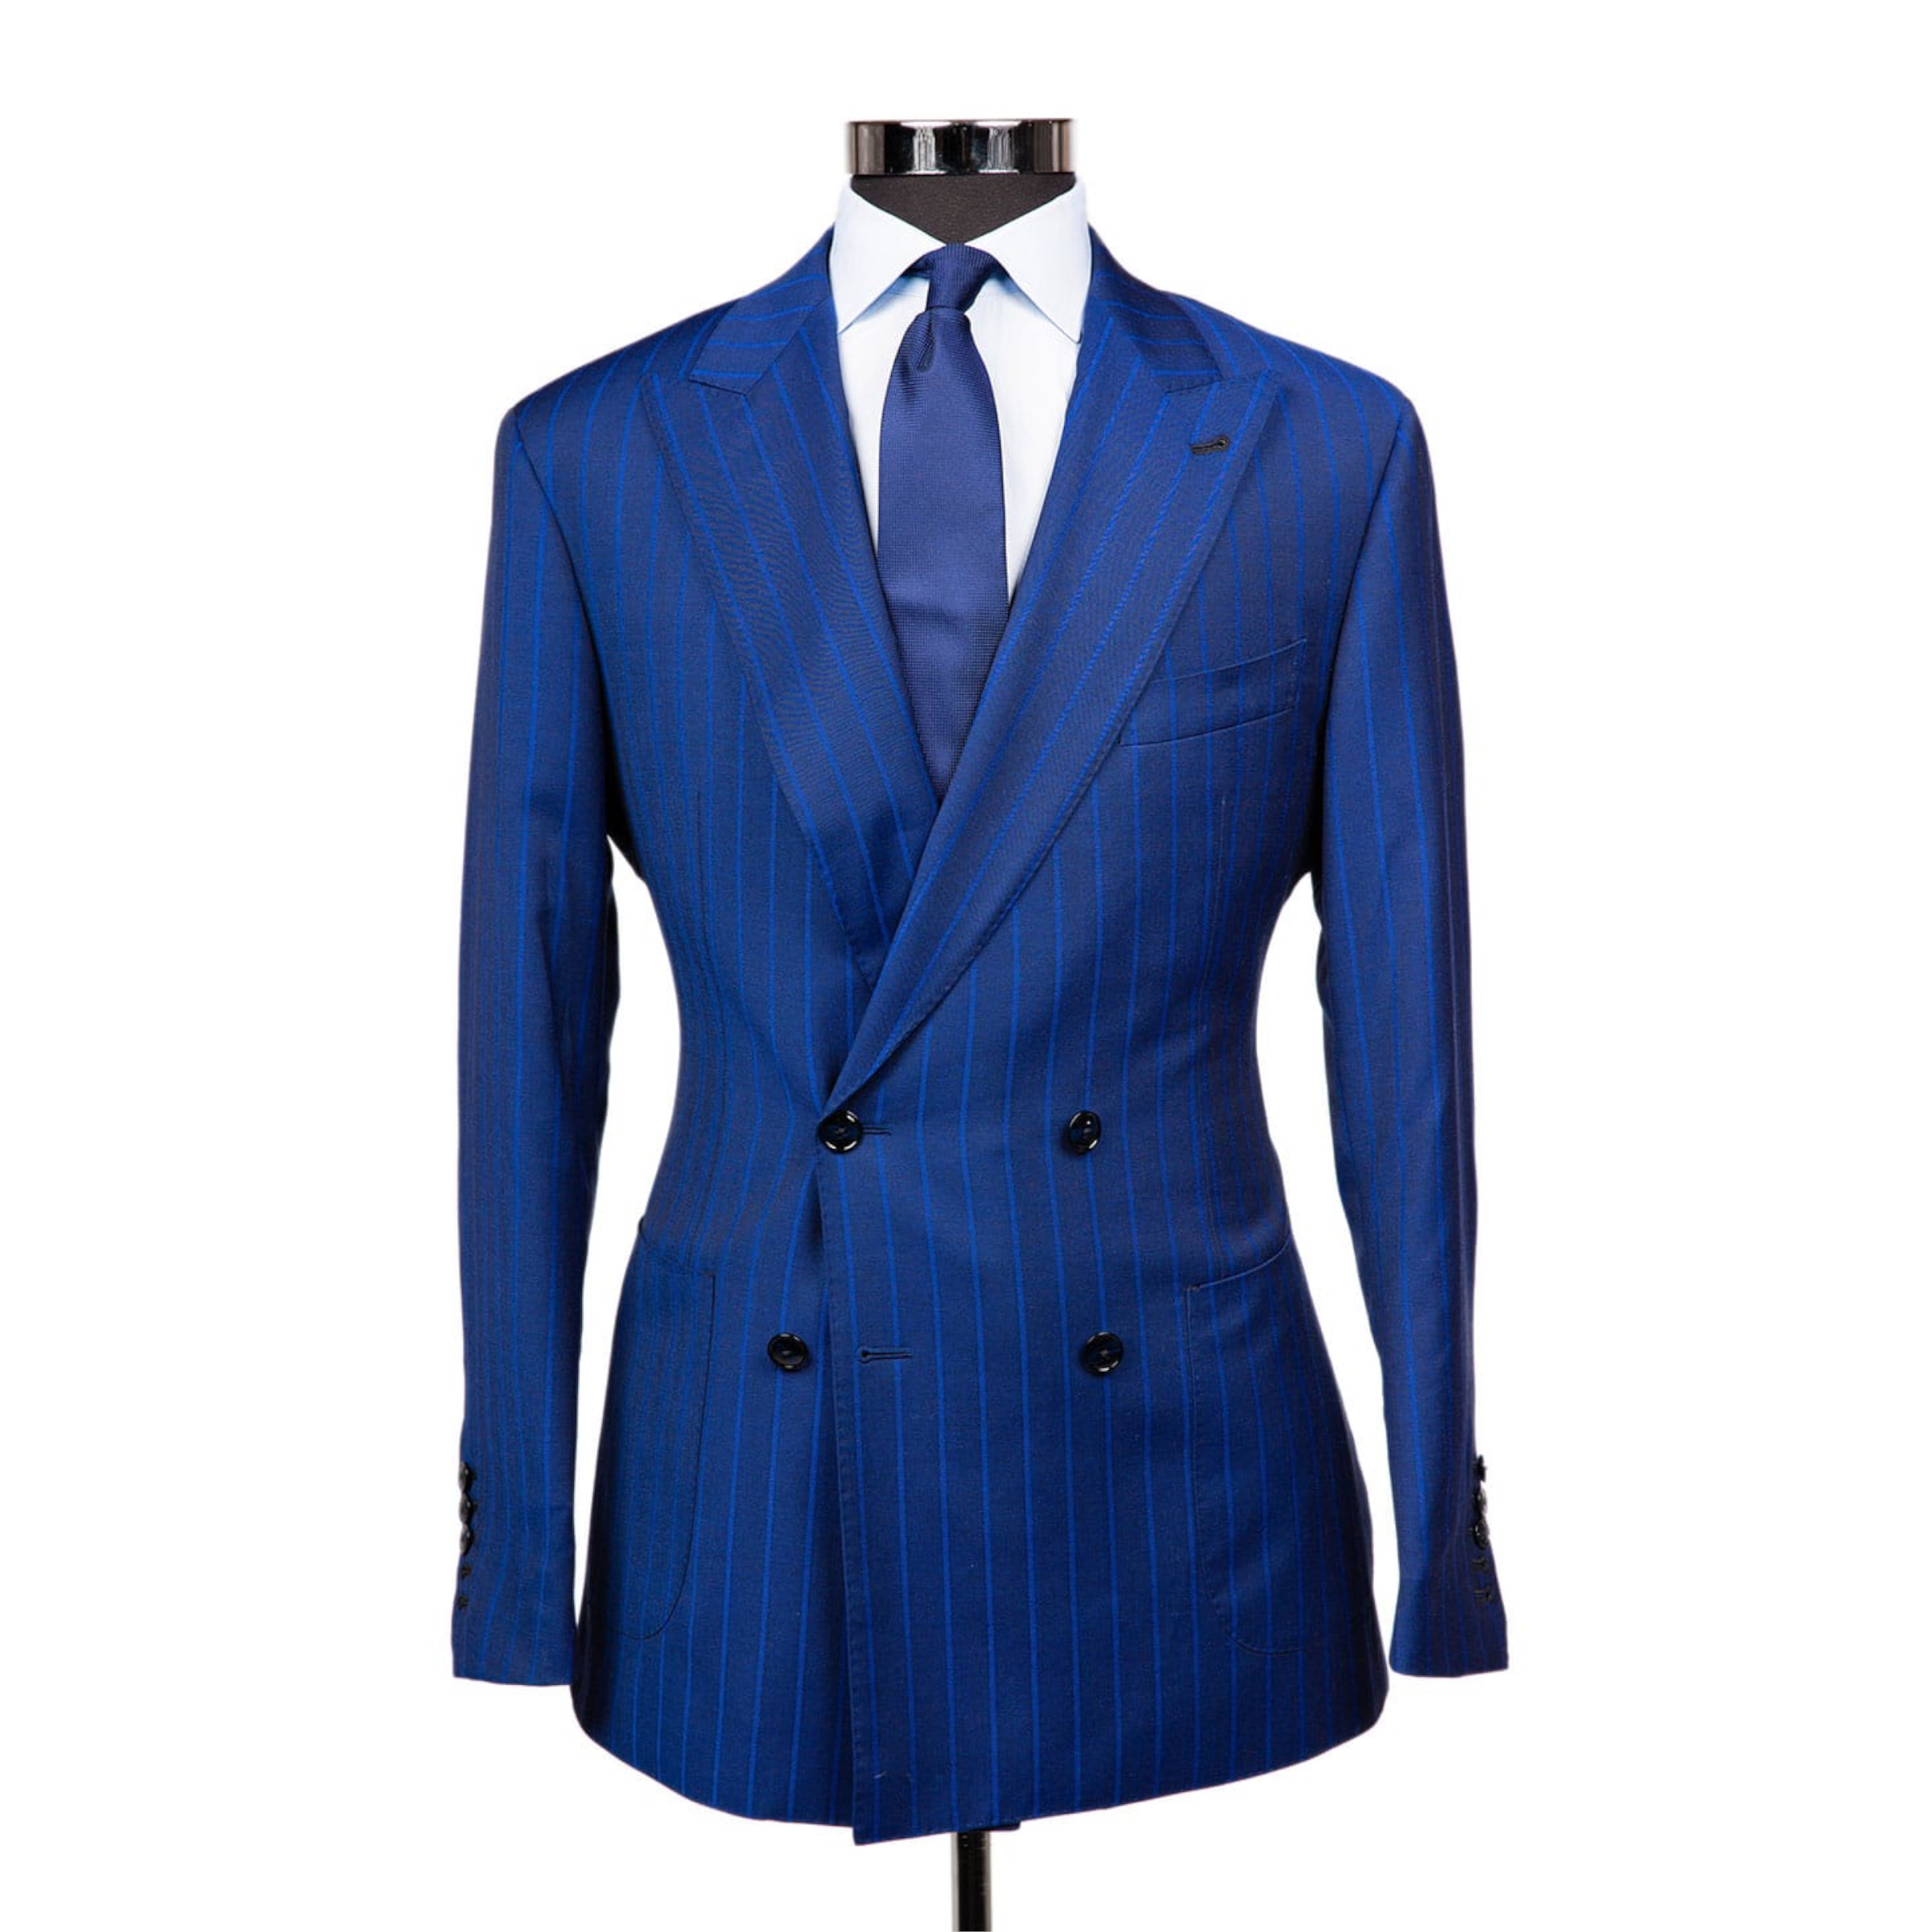 A navy suit jacket with cobalt pinstripes on a body form with a white shirt and cobalt blue tie on a white background